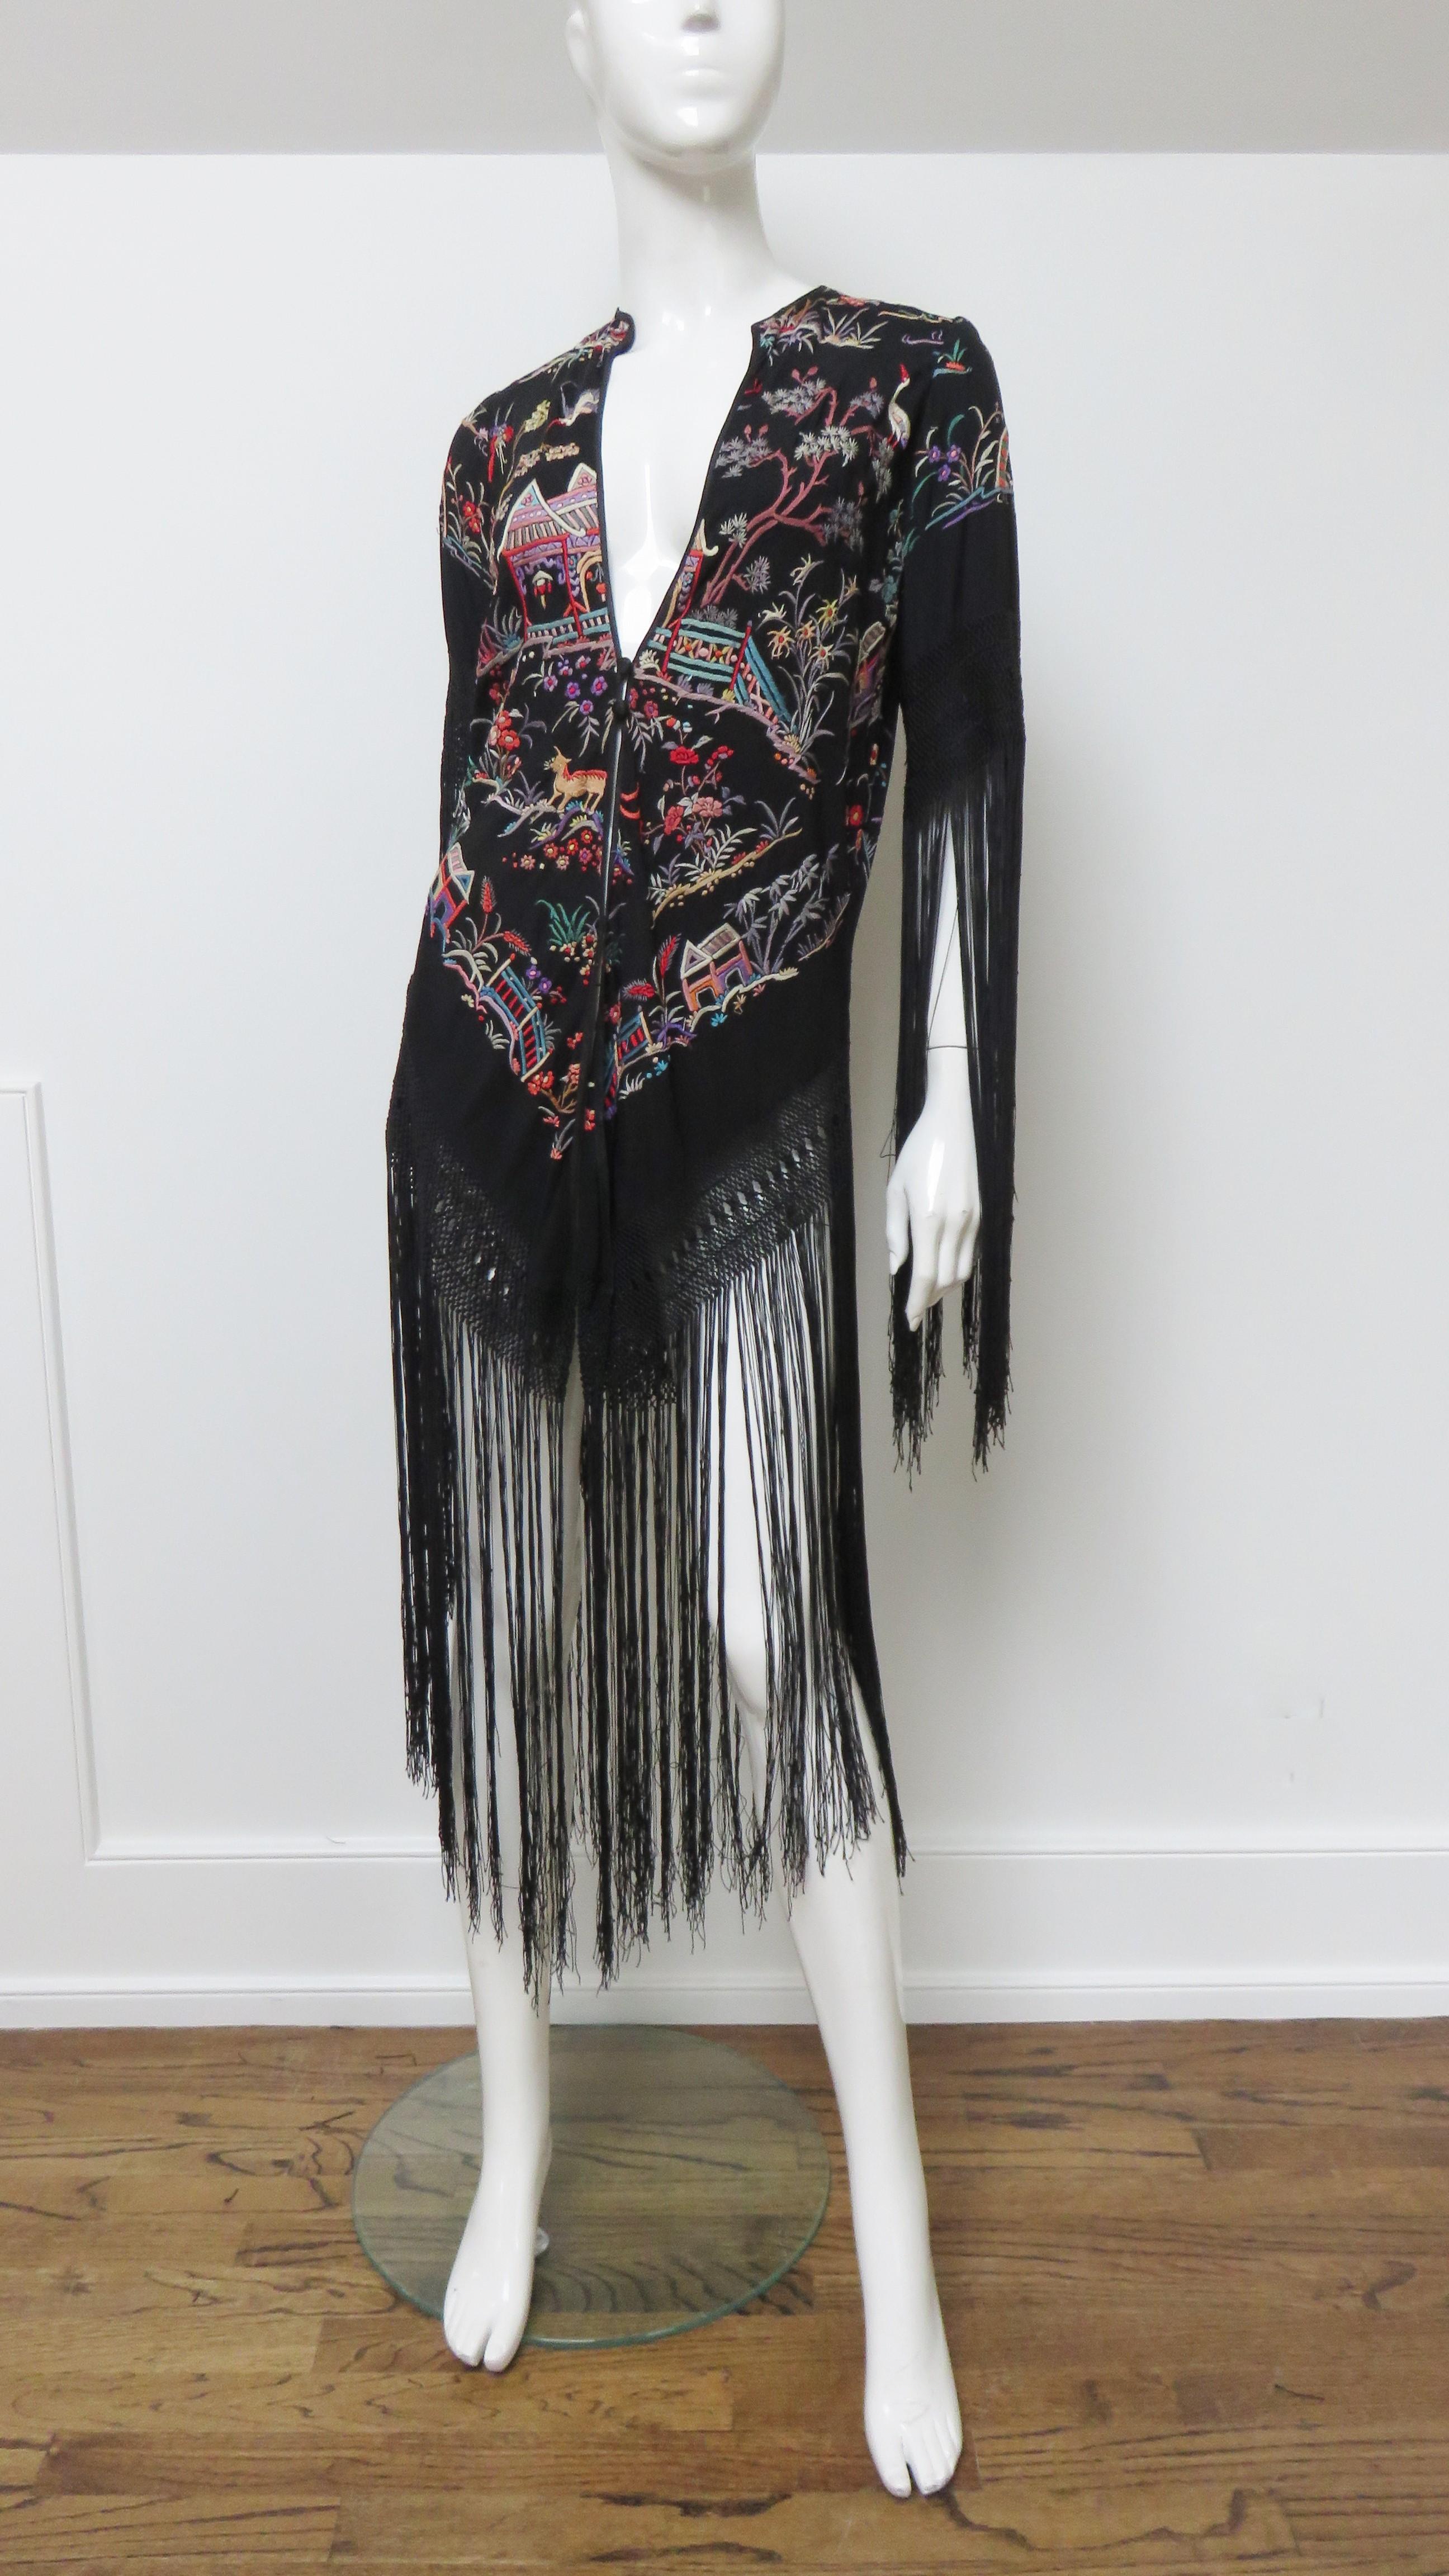 This is an elaborately embroidered 1920s black silk coat, jacket covered with gorgeous, colorful embroidery of people, birds and animals, pagodas, bridges, walkways, flowers and trees which pop against the black silk. The coat has a V neckline and